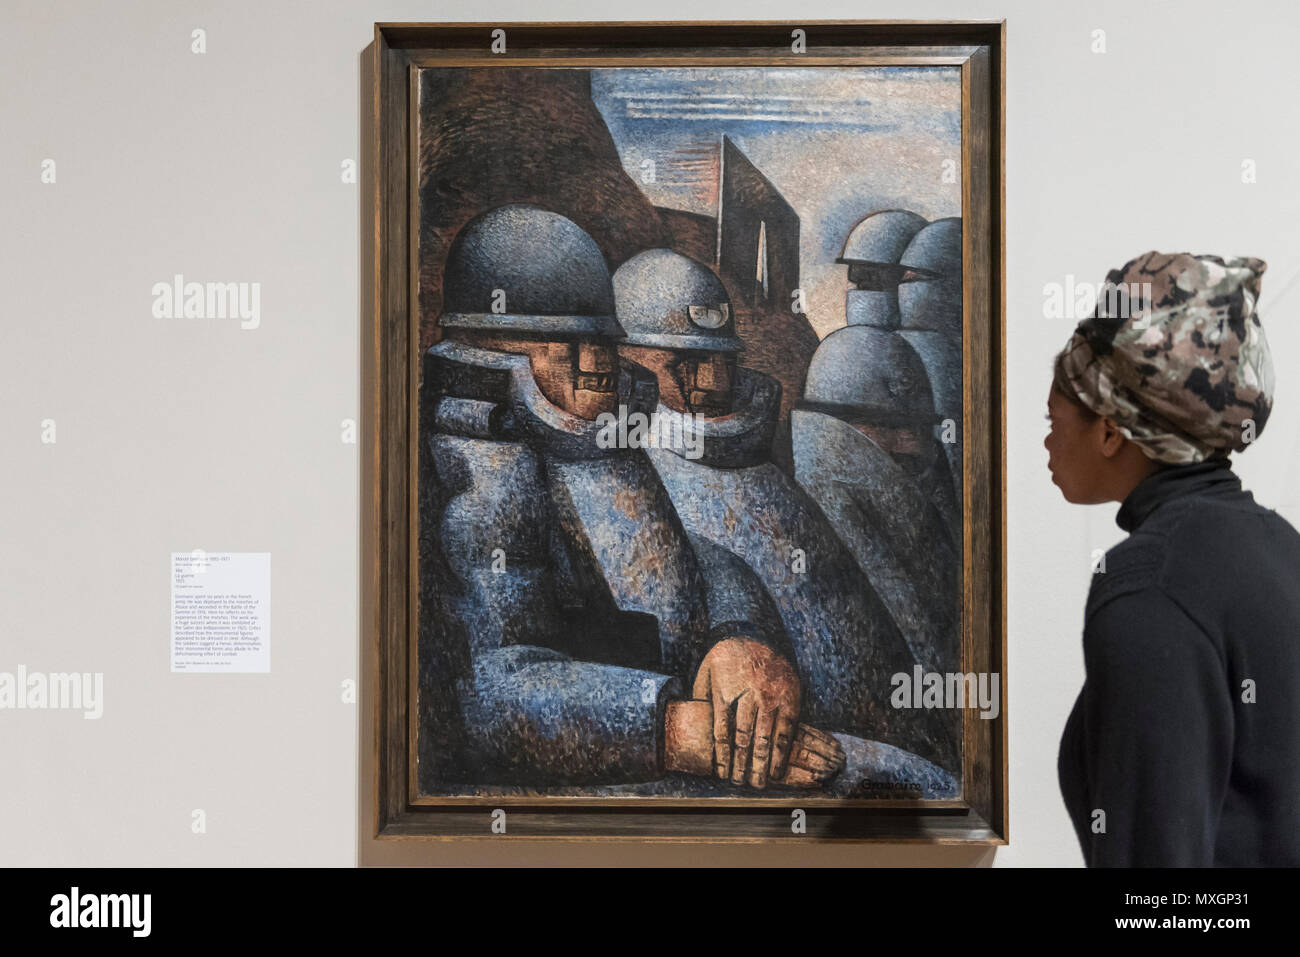 London, UK. 4 June 2018. A gallery staff member views "War, La Guerre",  1925, by Marcel Gromaire at a preview of "Aftermath: Art in the wake of  World War One" at Tate